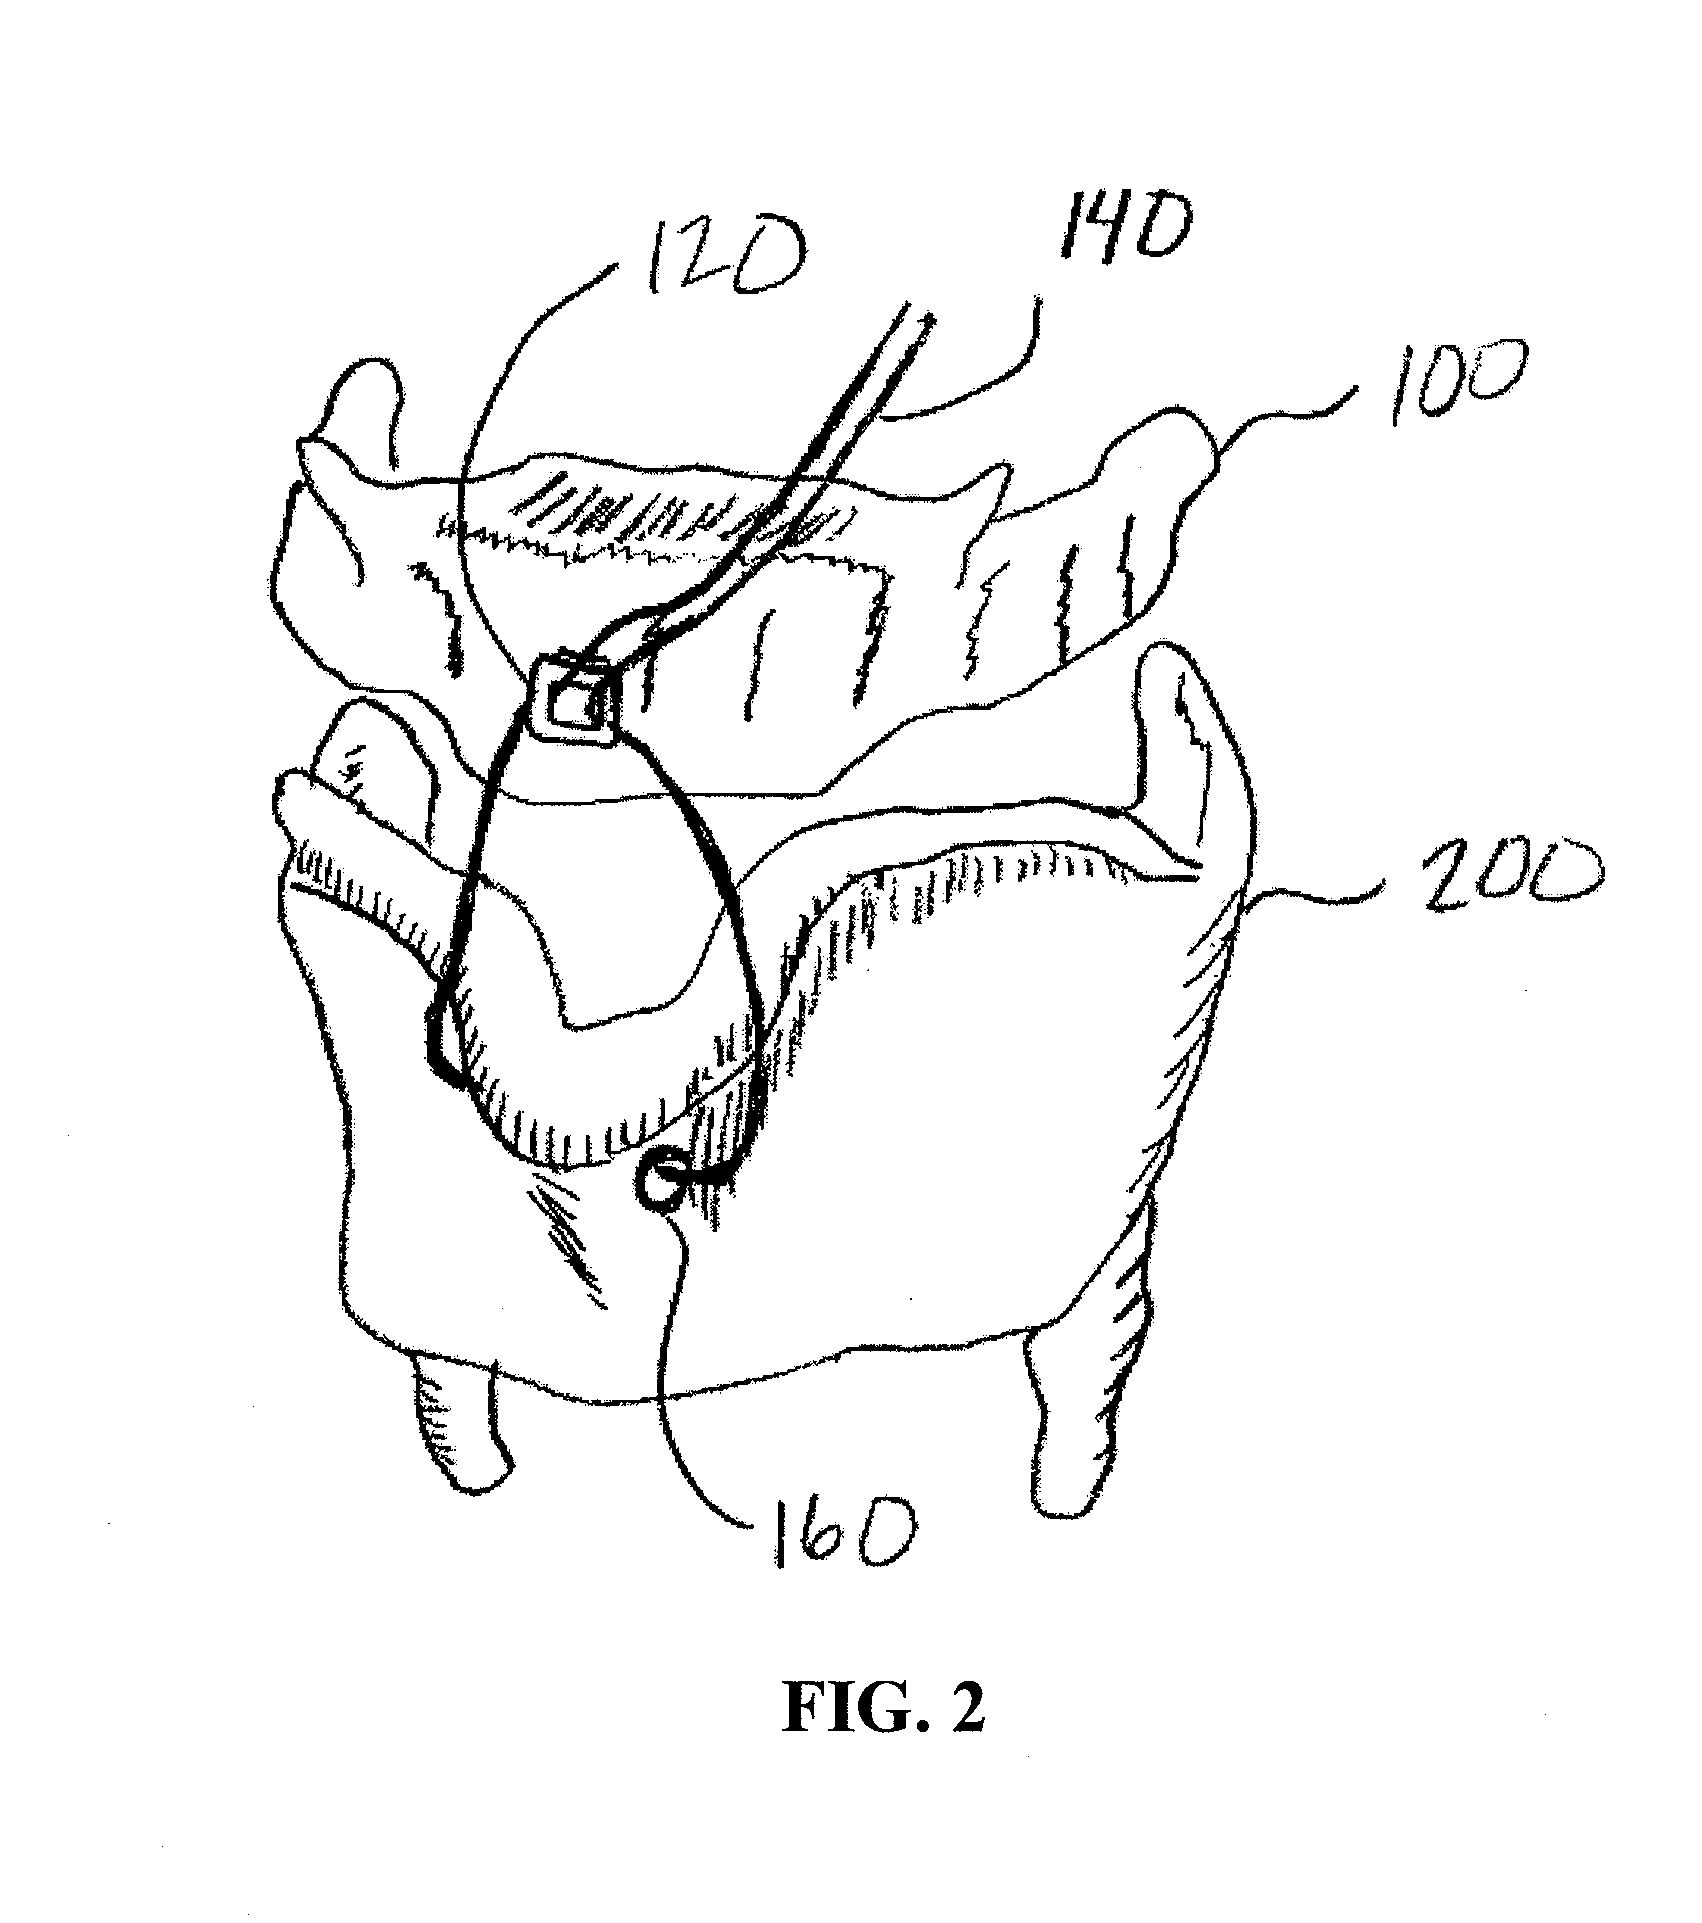 Method and system for displacing hyoid bone